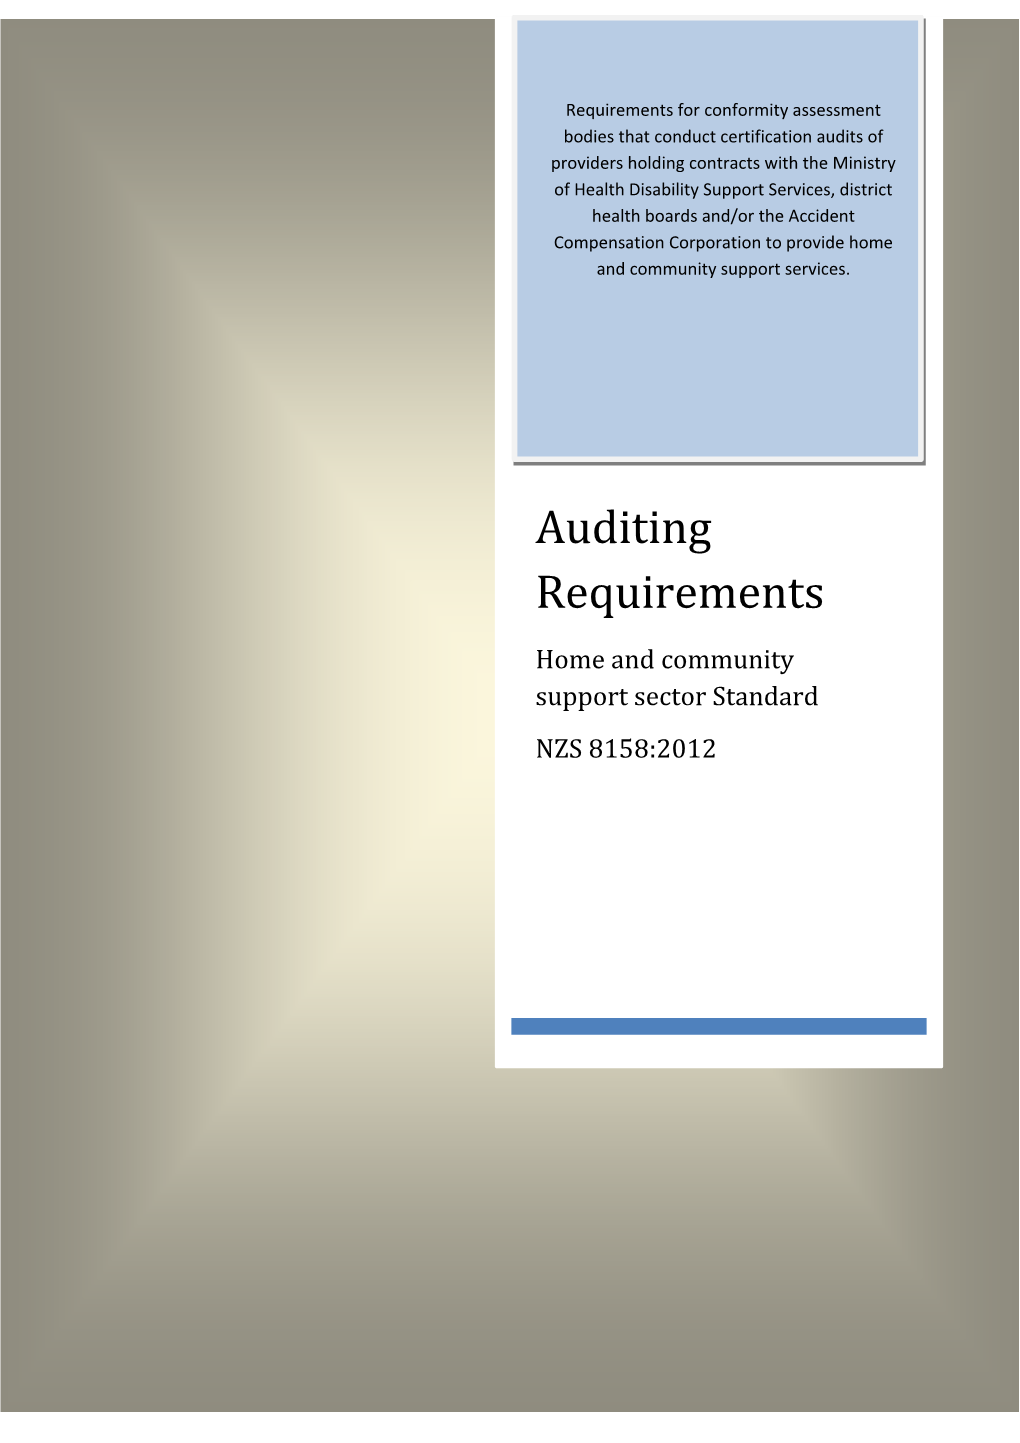 Auditing Requirements: Home and Community Support Sector Standard